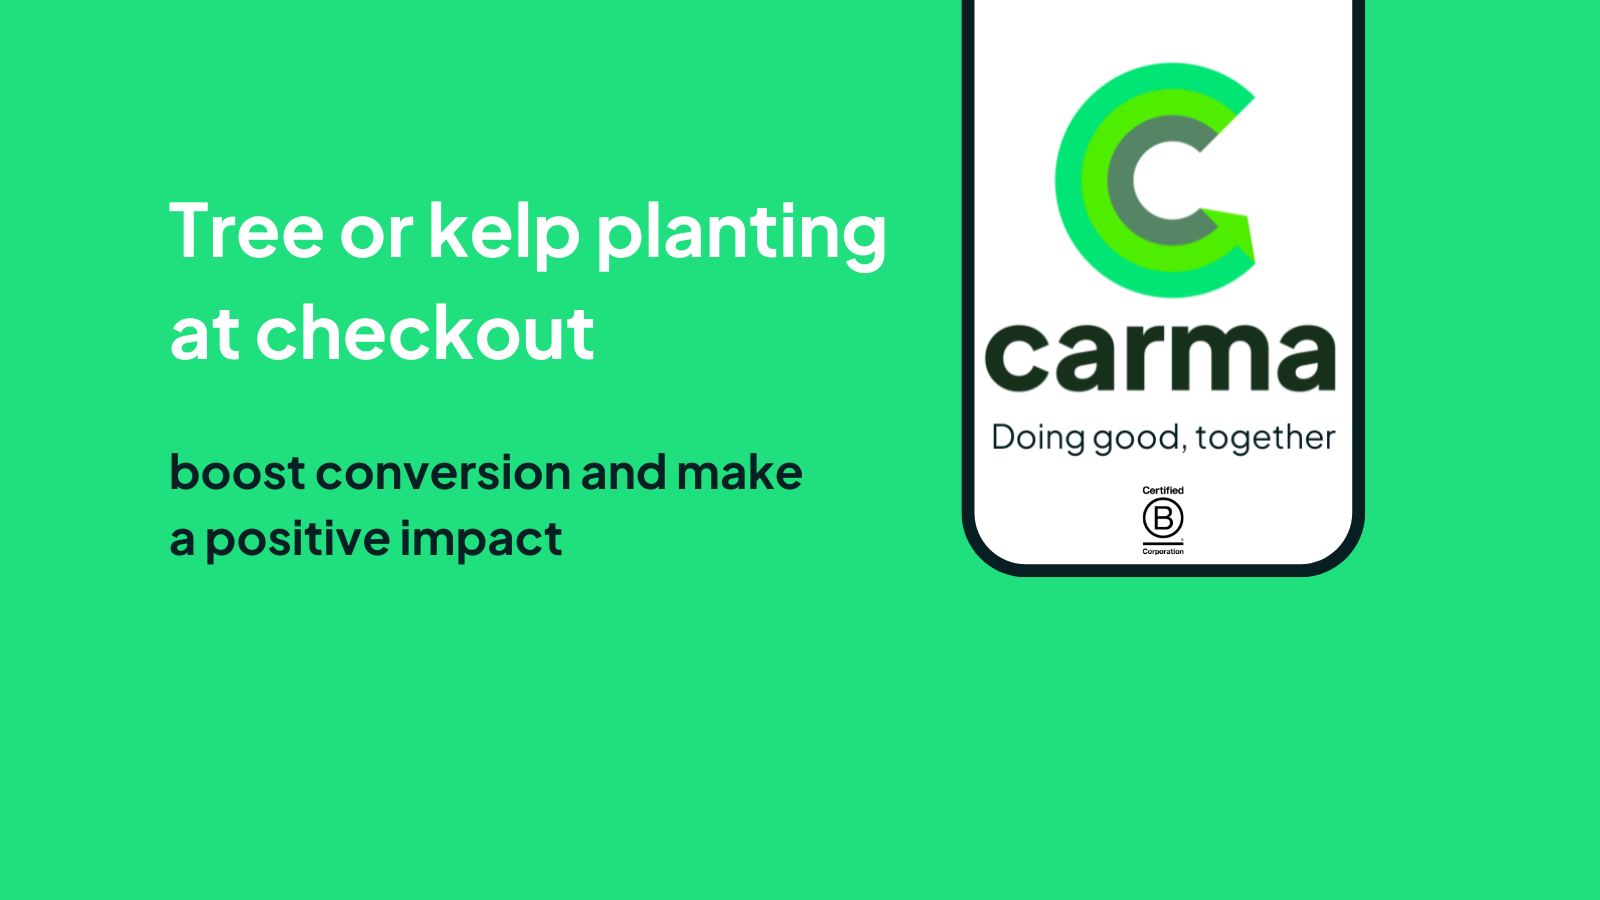 Plant trees or kelp at checkout